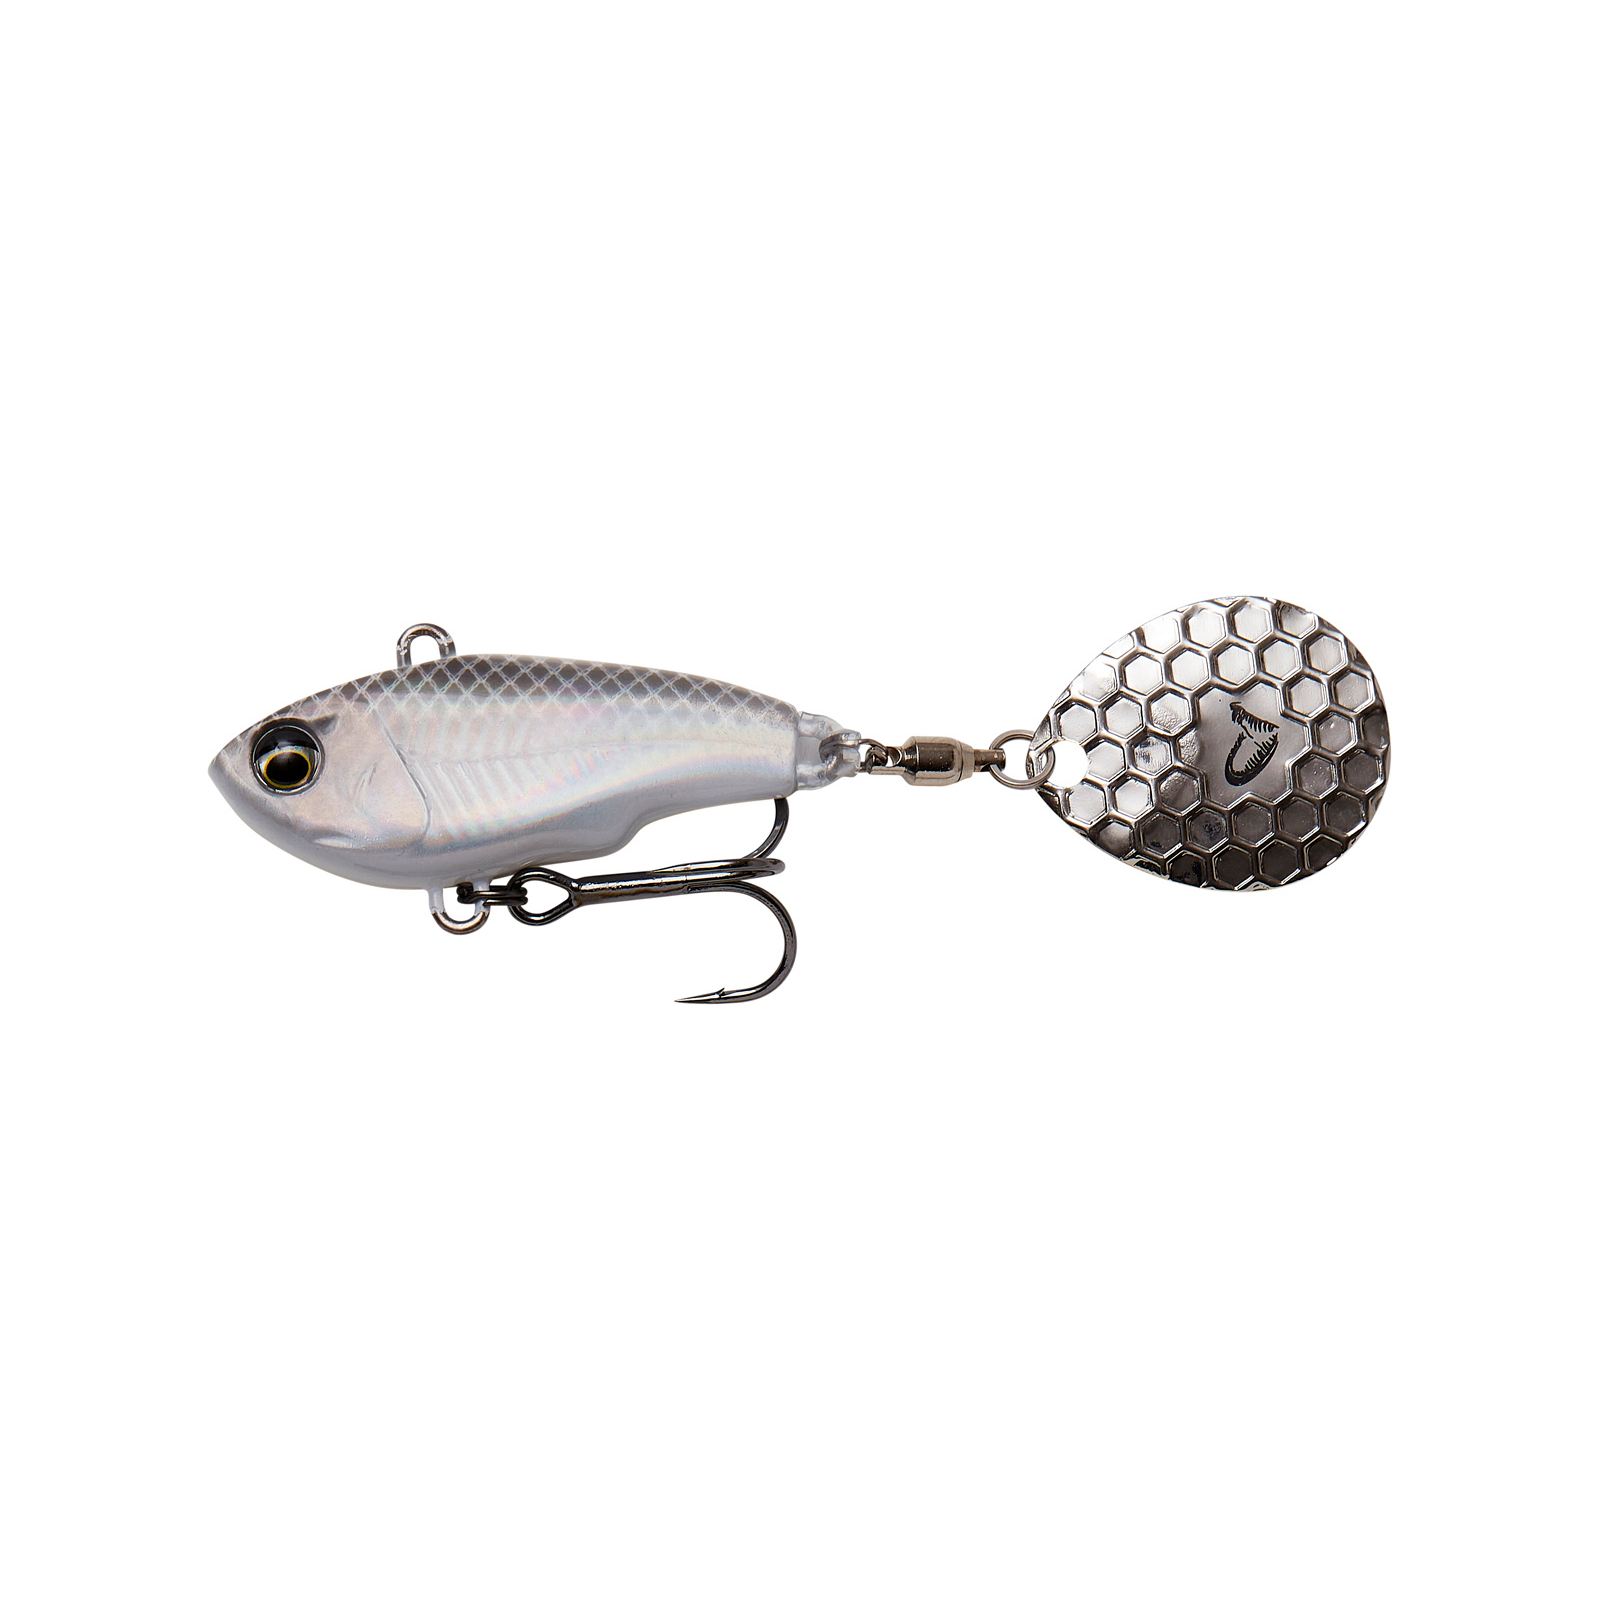 Блешня Savage Gear Fat Tail Spin 65mm 16.0g White Silver (1854.11.70)